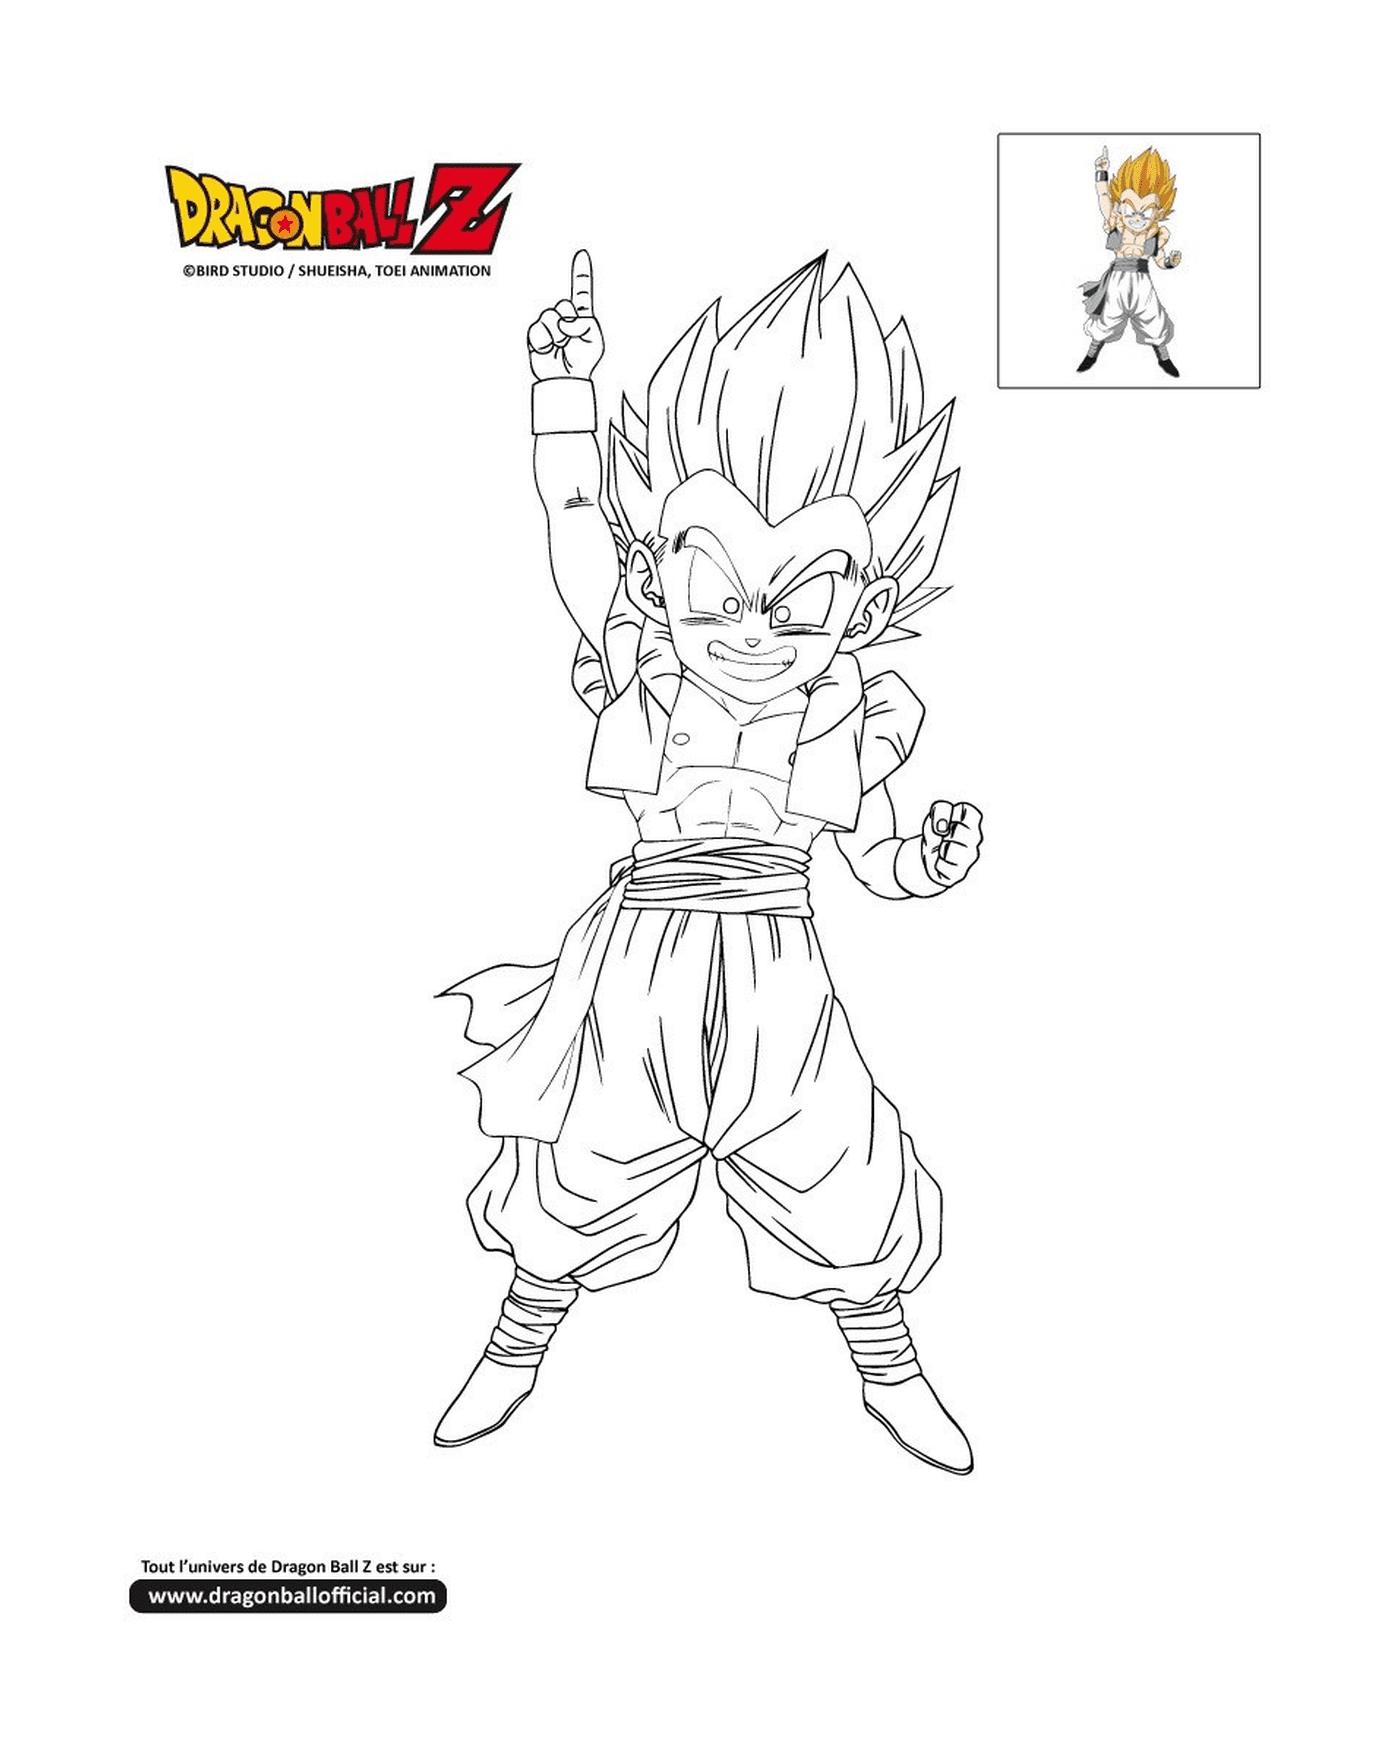  Gotenks about to hit in Dragon Ball Z 